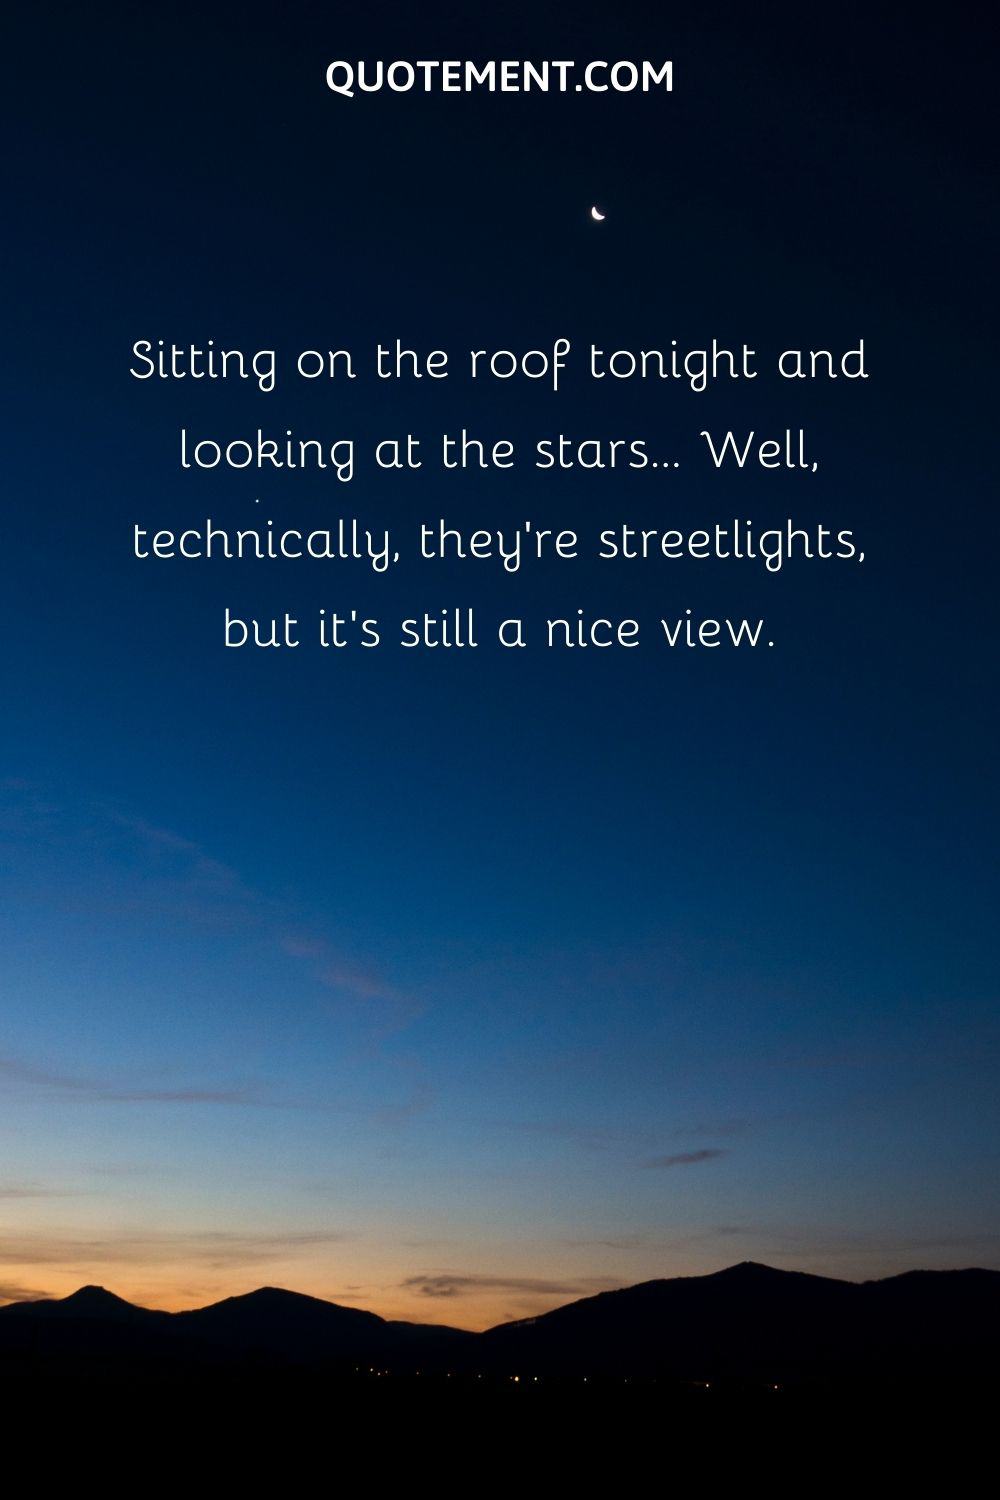 Sitting on the roof tonight and looking at the stars